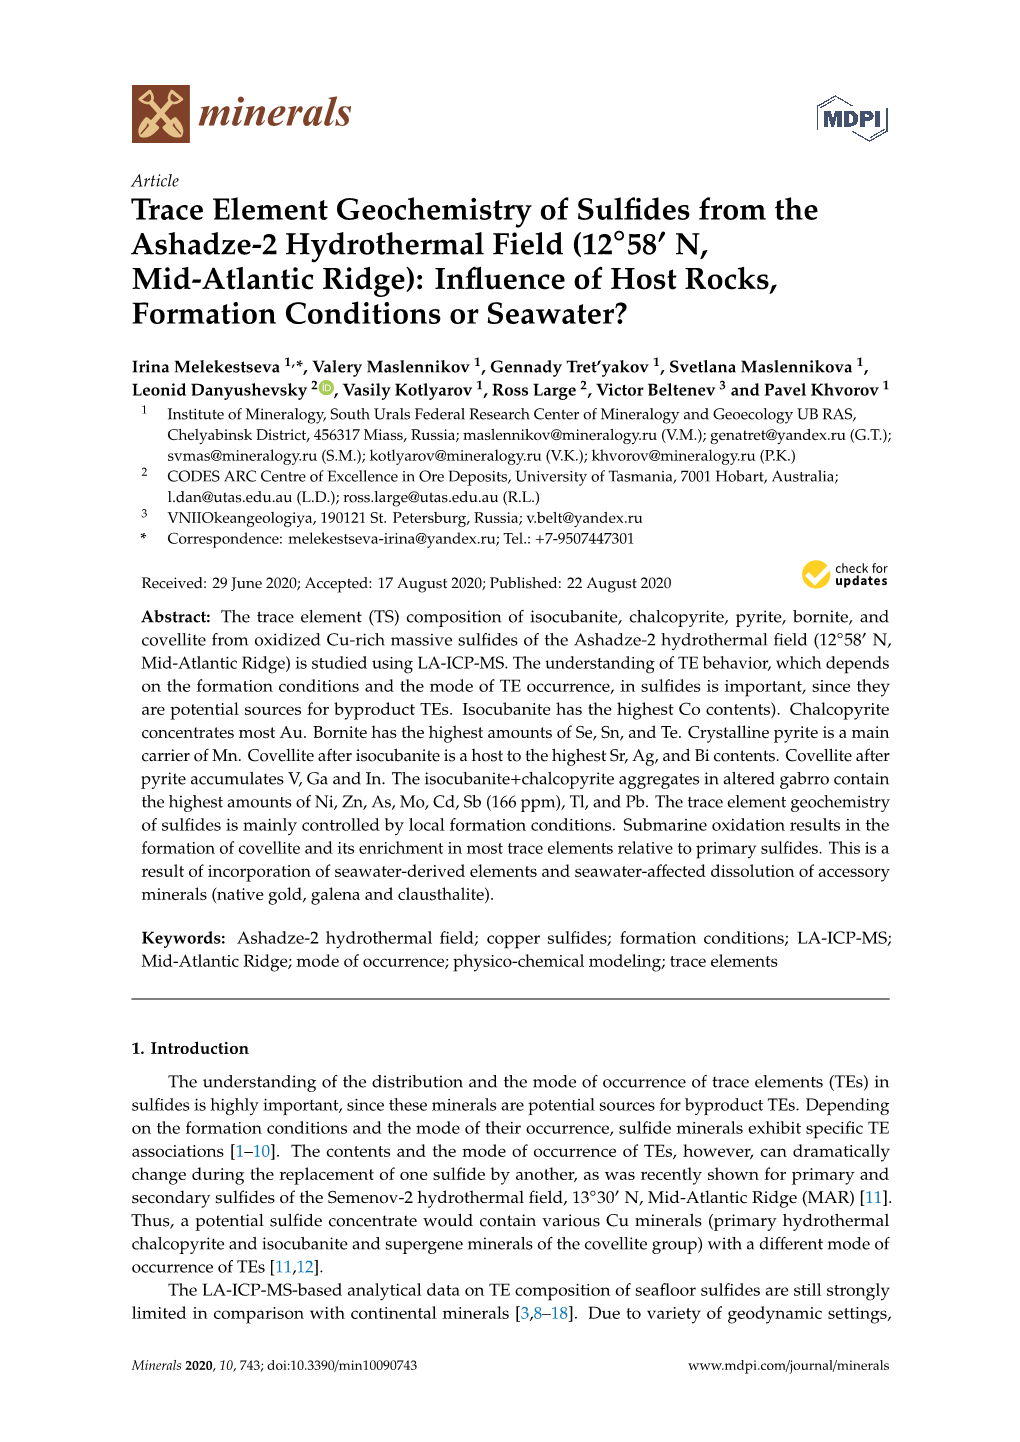 Trace Element Geochemistry of Sulfides from the Ashadze-2